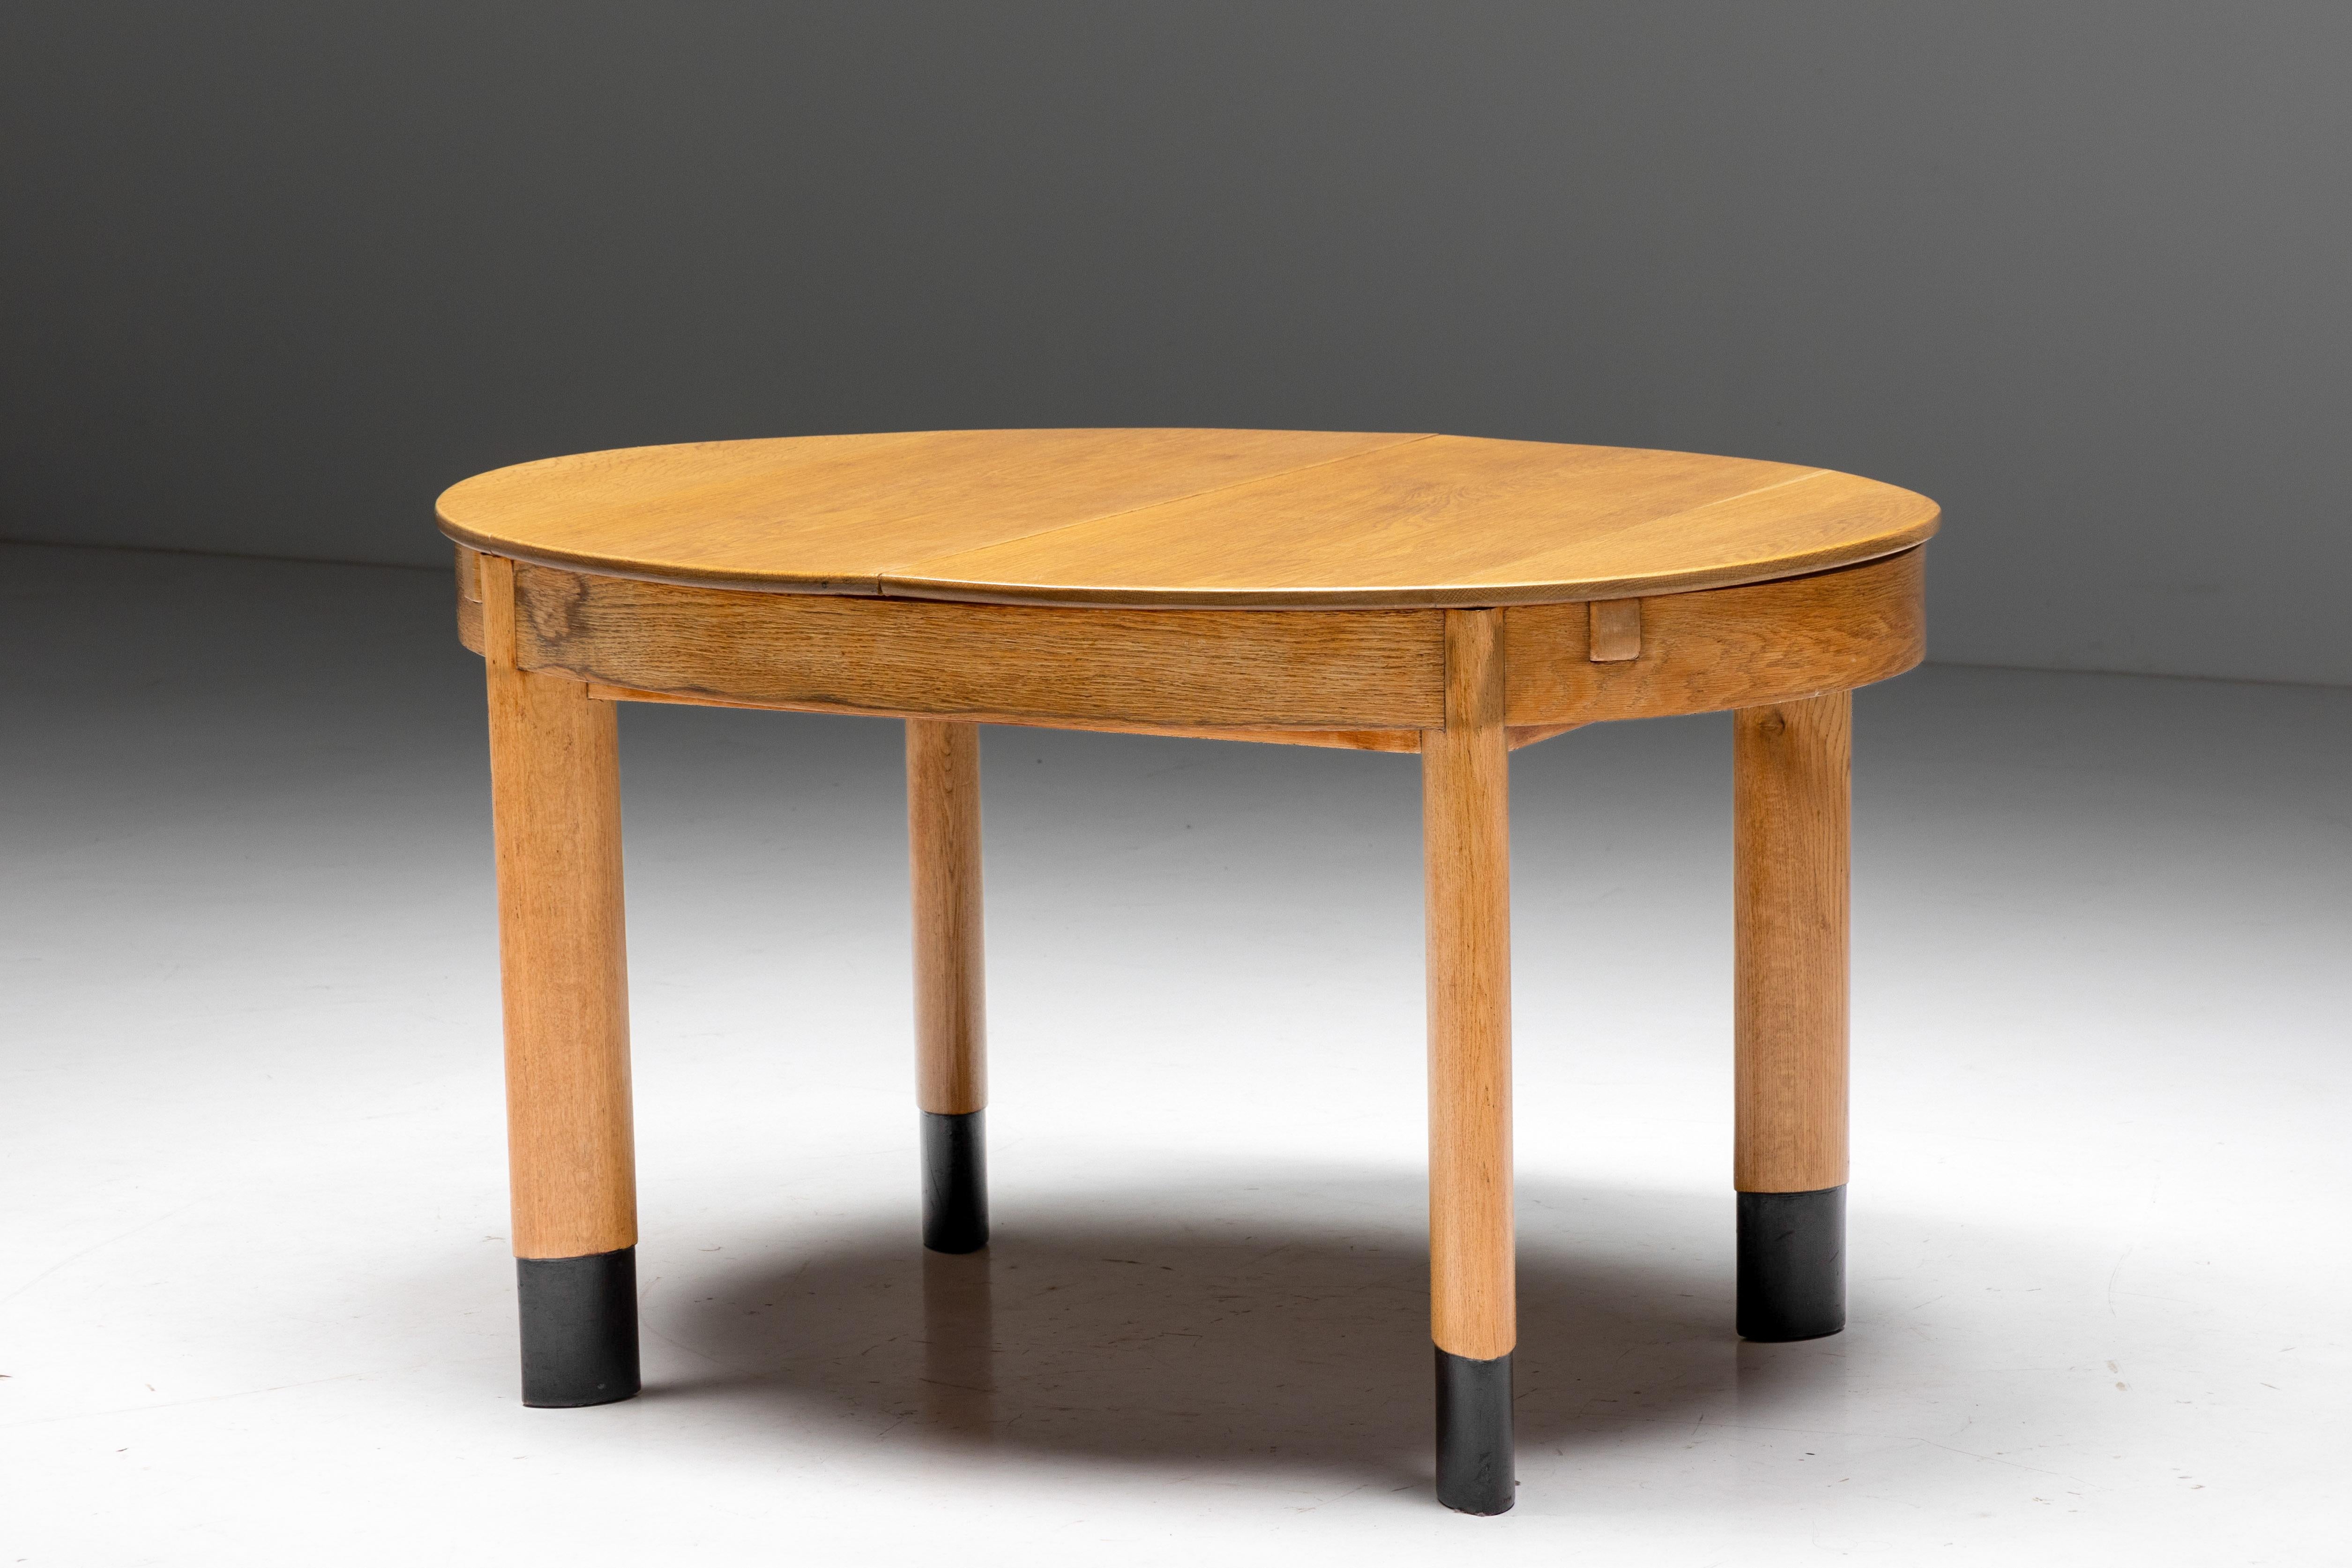 Oval dining table in oak, on juxtaposed oval legs, Dutch, 1920s

Such a Minimalist and modern piece for it's time. Two elliptic shapes following a juxtaposed axis displays great knowledge of math, architecture and design. Truly an Avant Garde